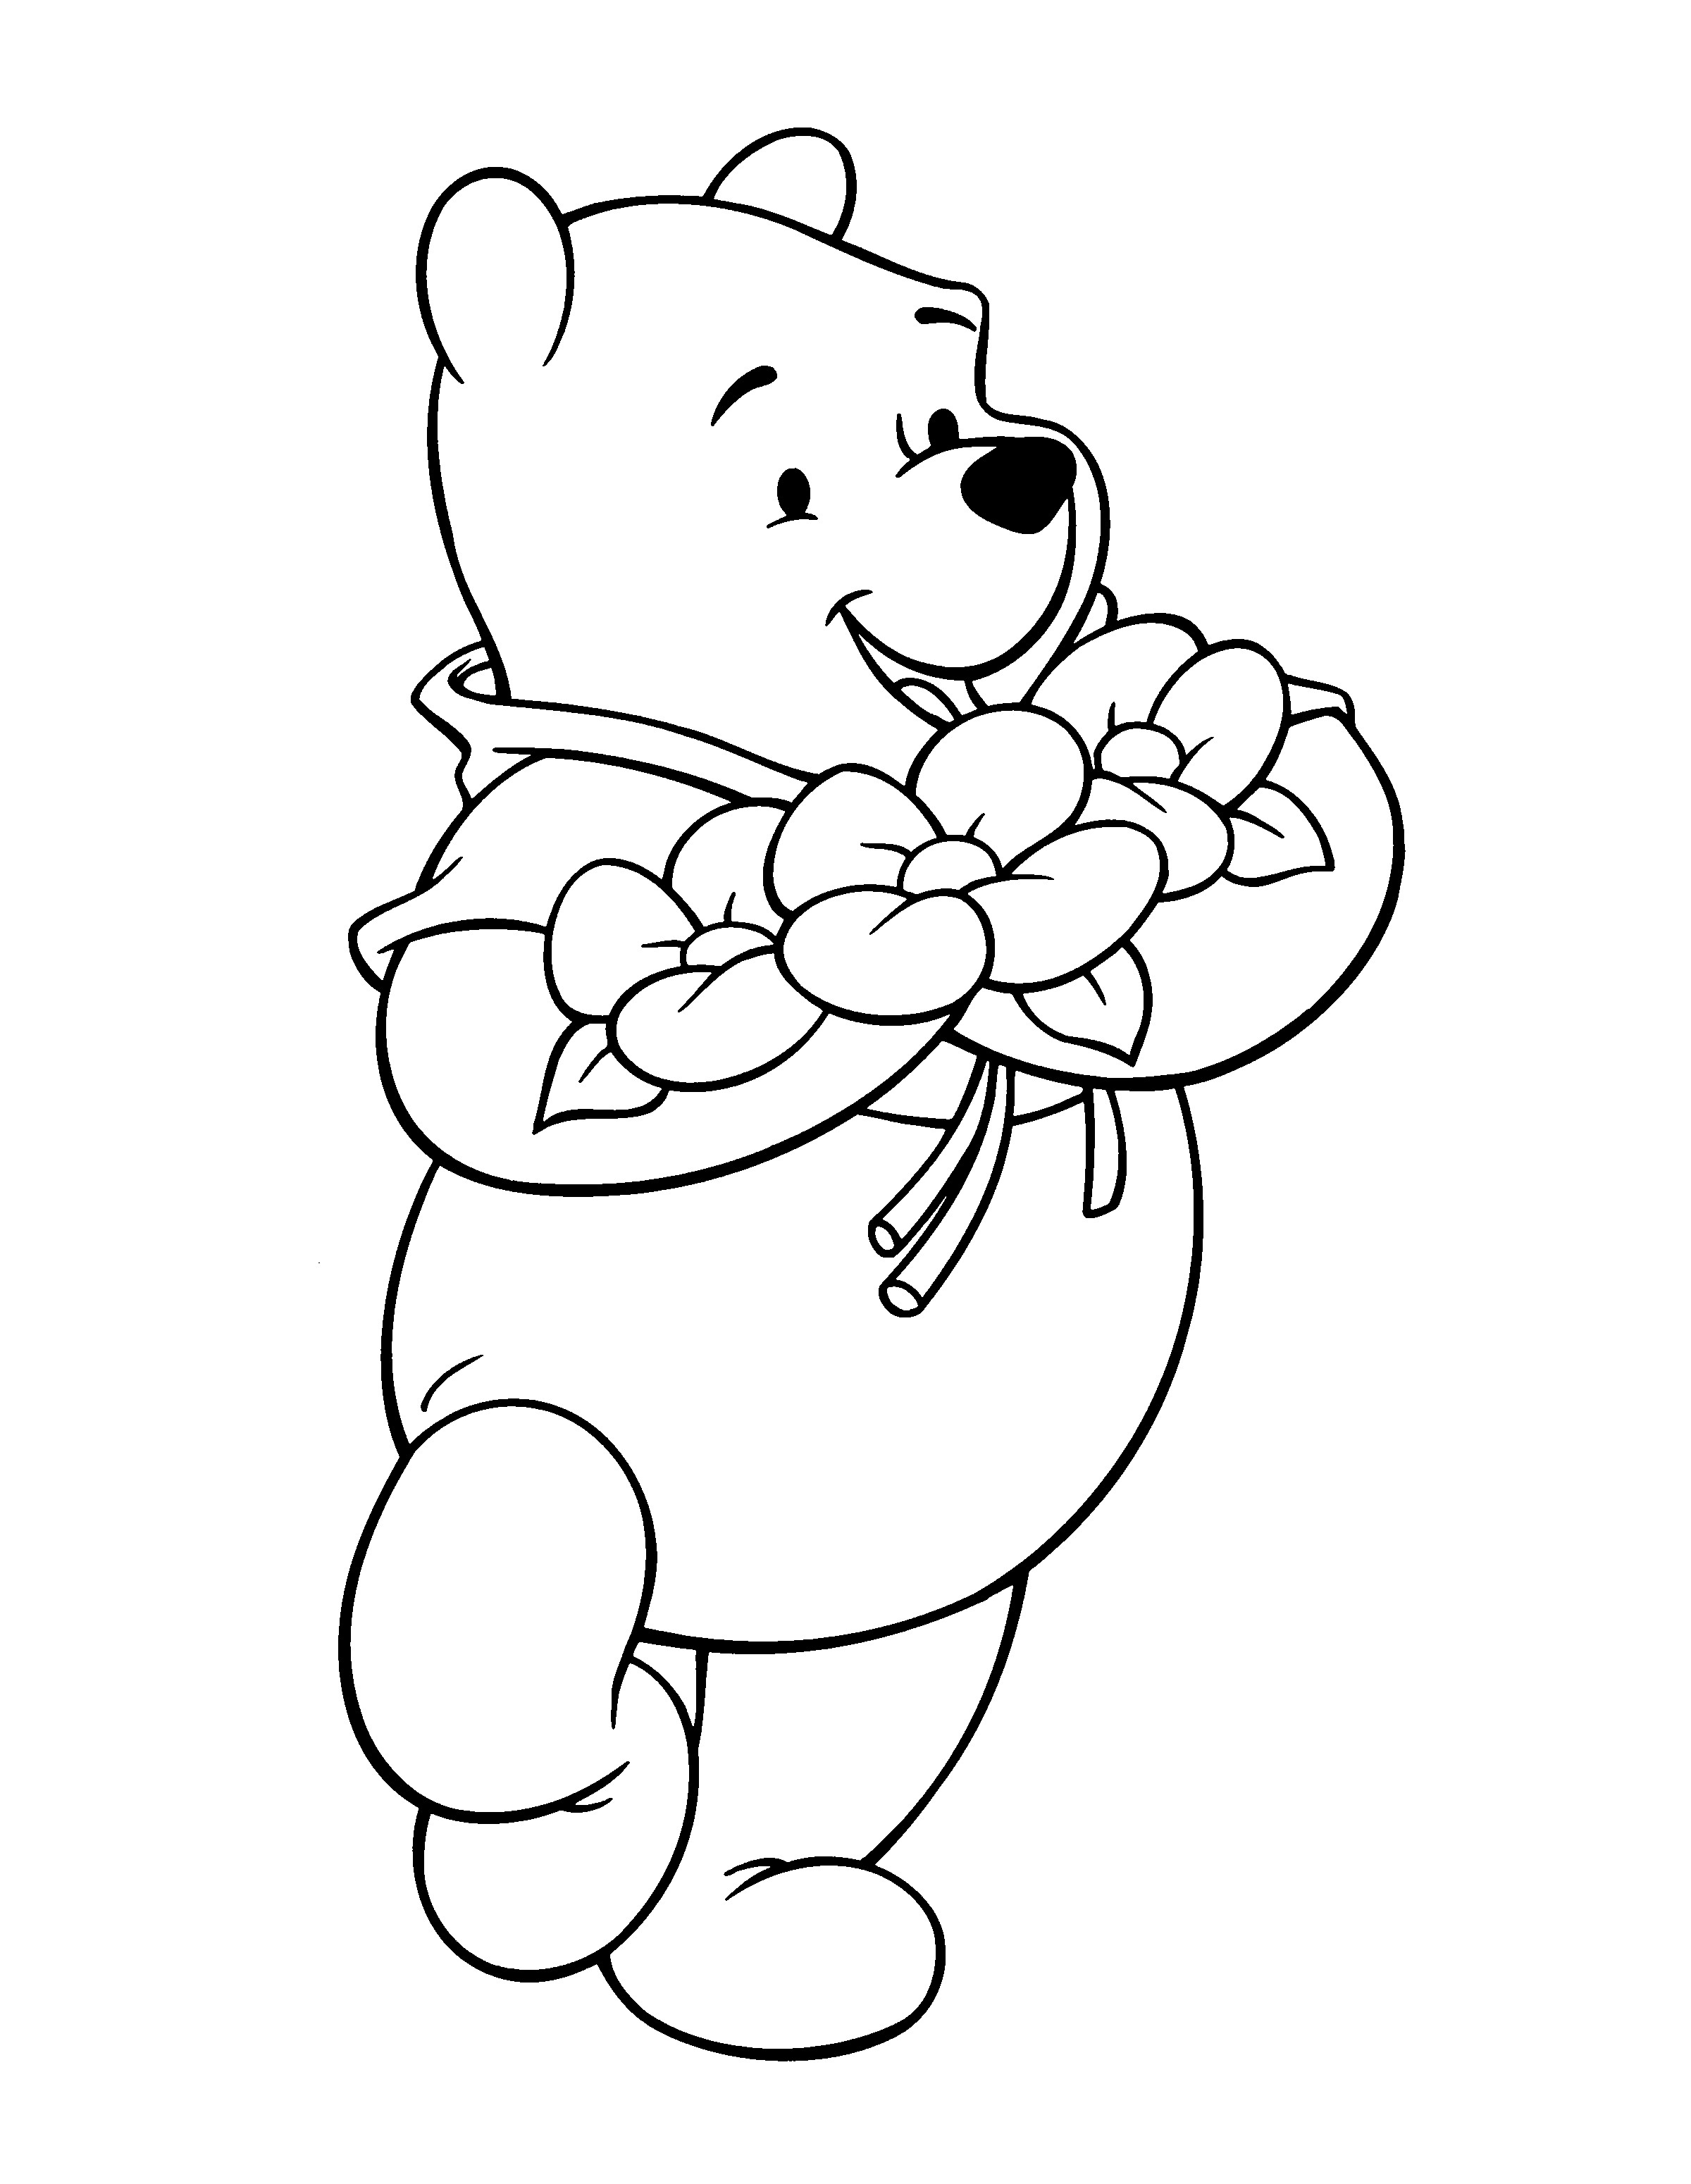 Winnie The Pooh Coloring Pages Online Coloring Book Cute Ba Pooh Coloring Pages Printable Pictures